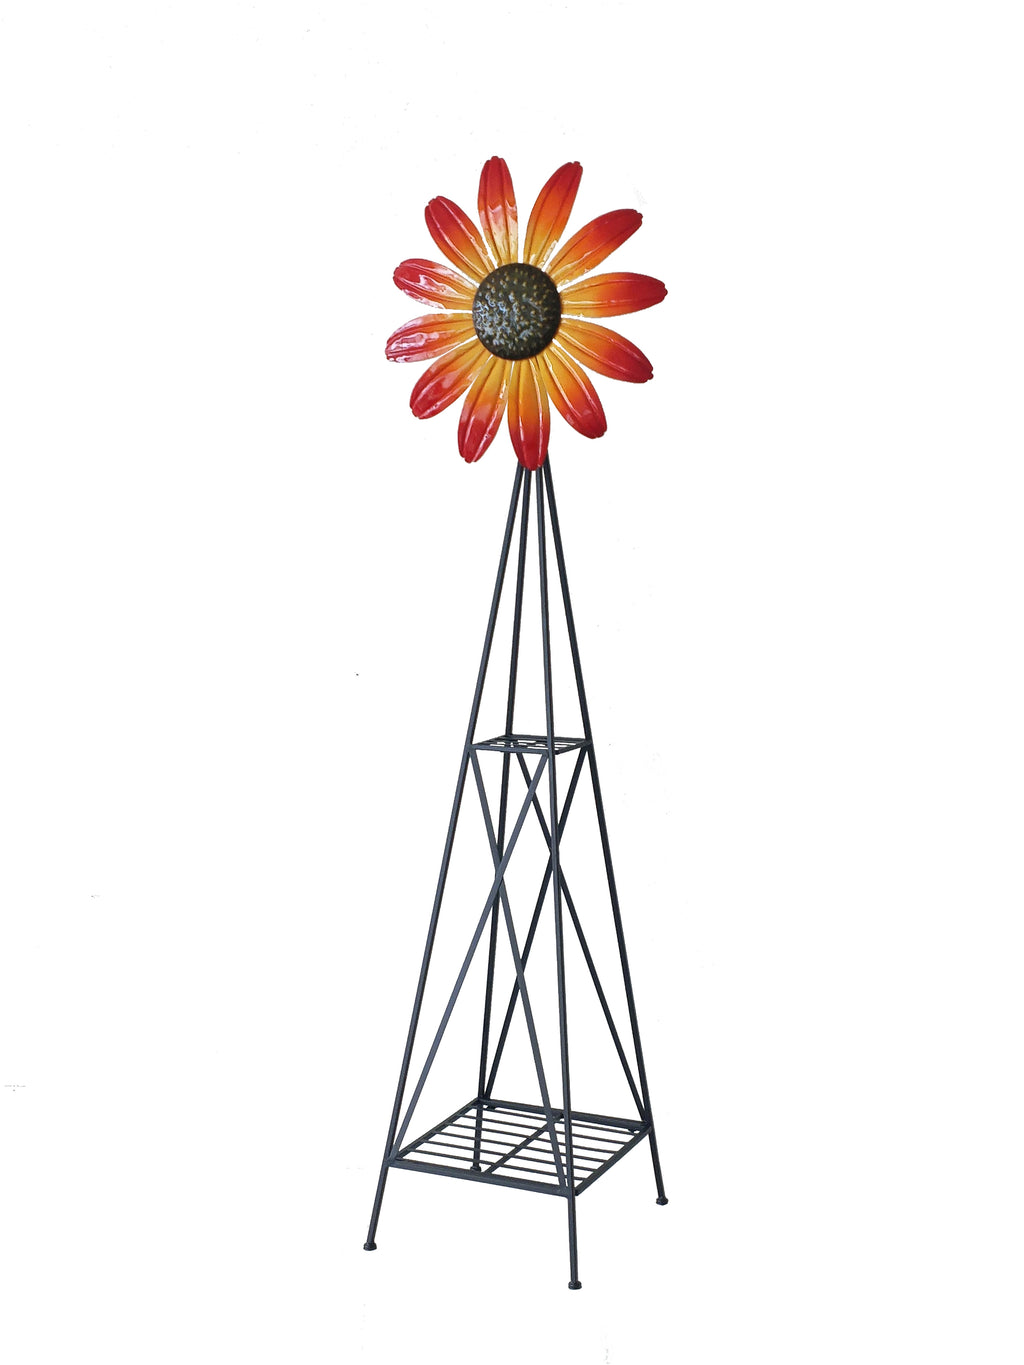 Replacement parts for Sunflower windmill